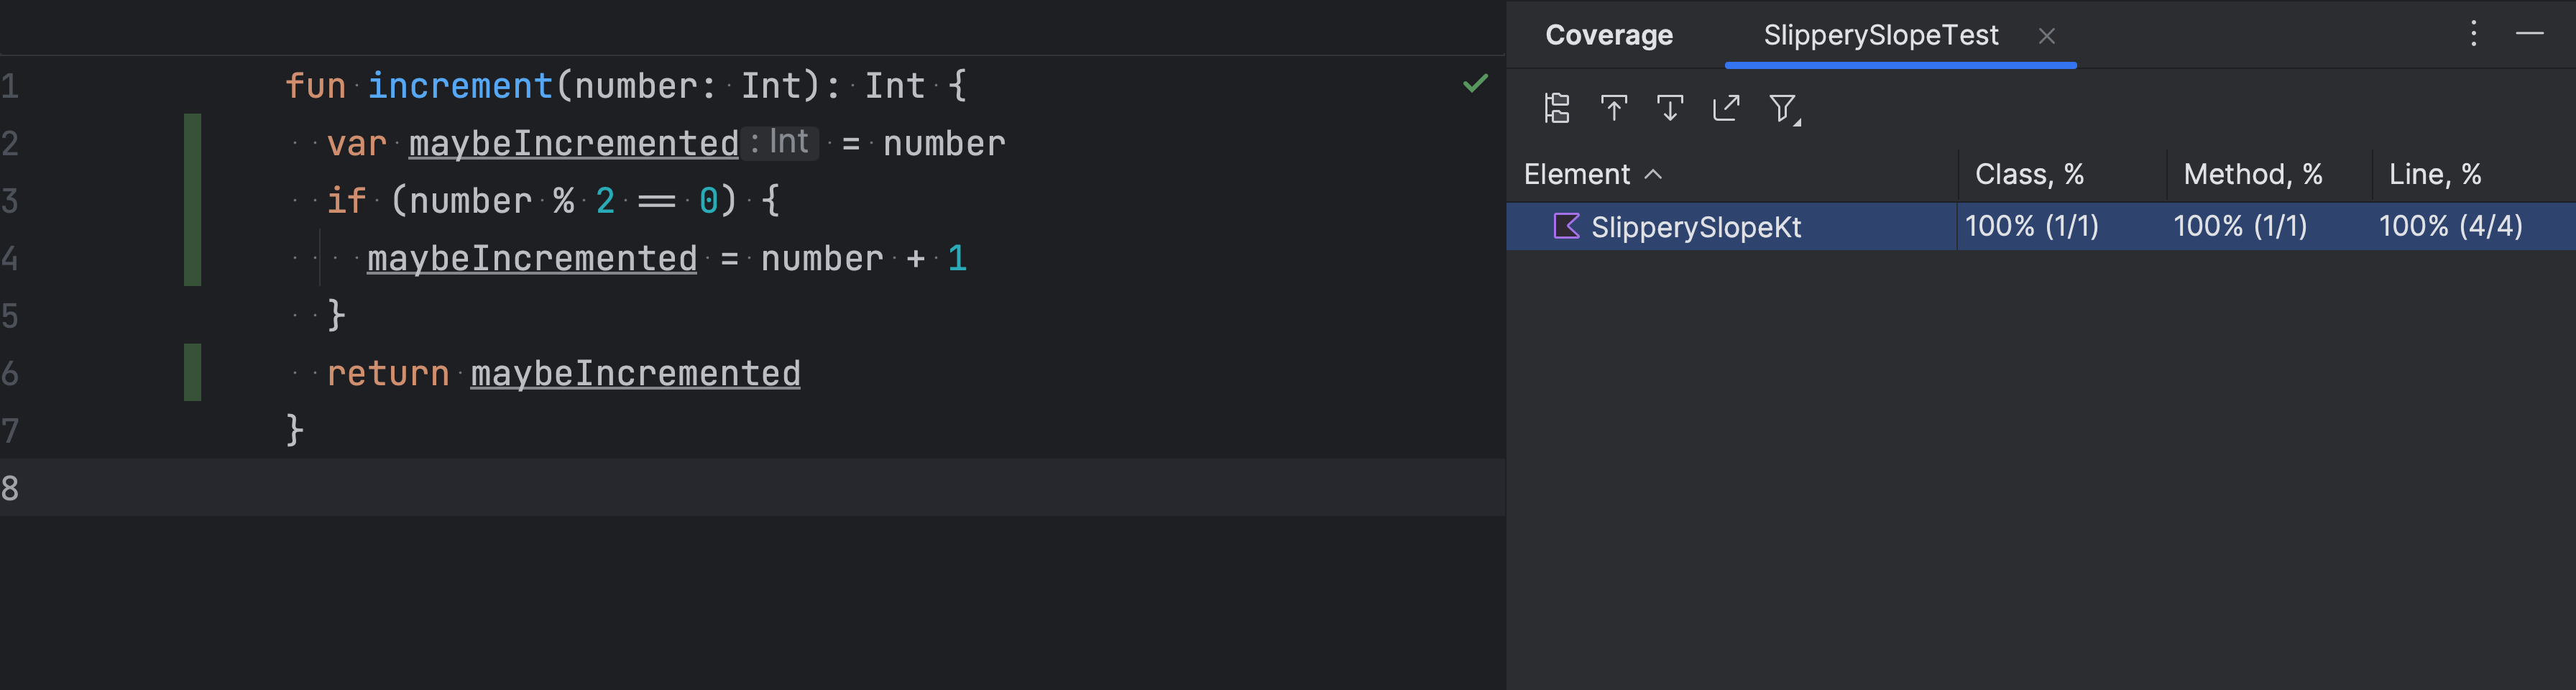 IDE showing 100% code coverage for the increment function